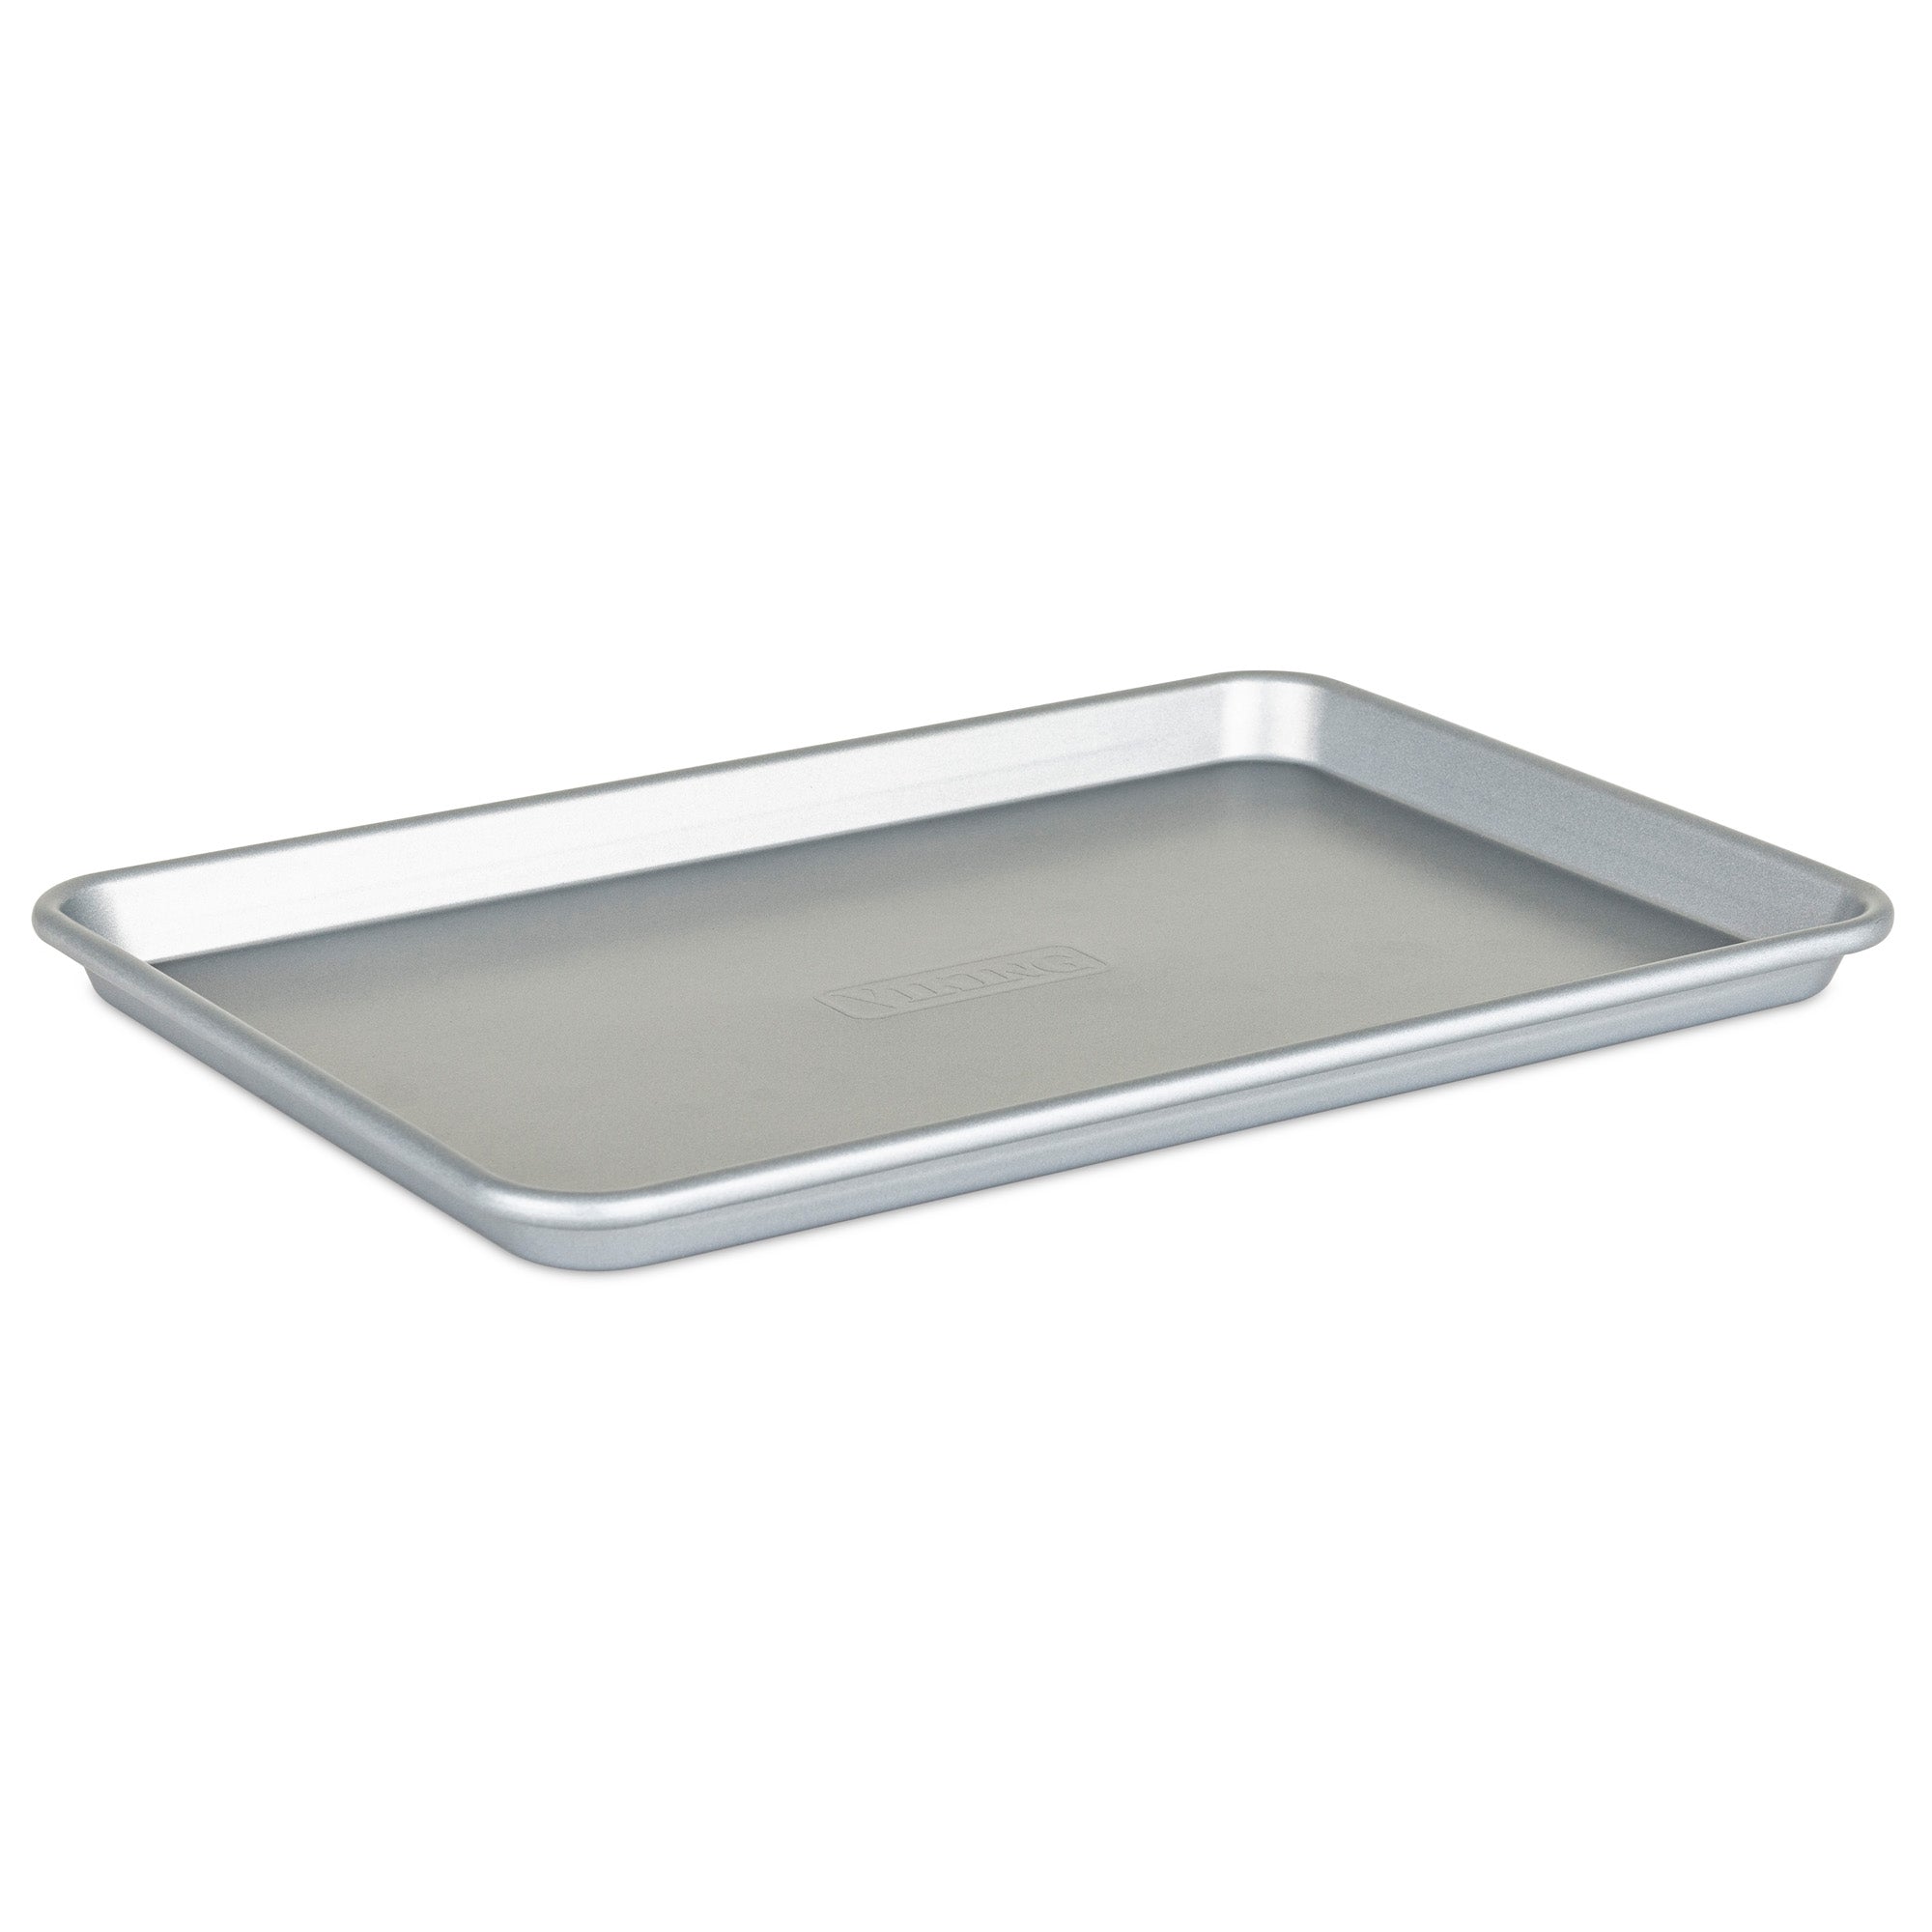 Jelly Roll Baking Sheet Pans - Professional Aluminum Cookie Sheet Set of 2  - Rimmed Baking Sheets for Baking and Roasting - Durable, Oven-safe